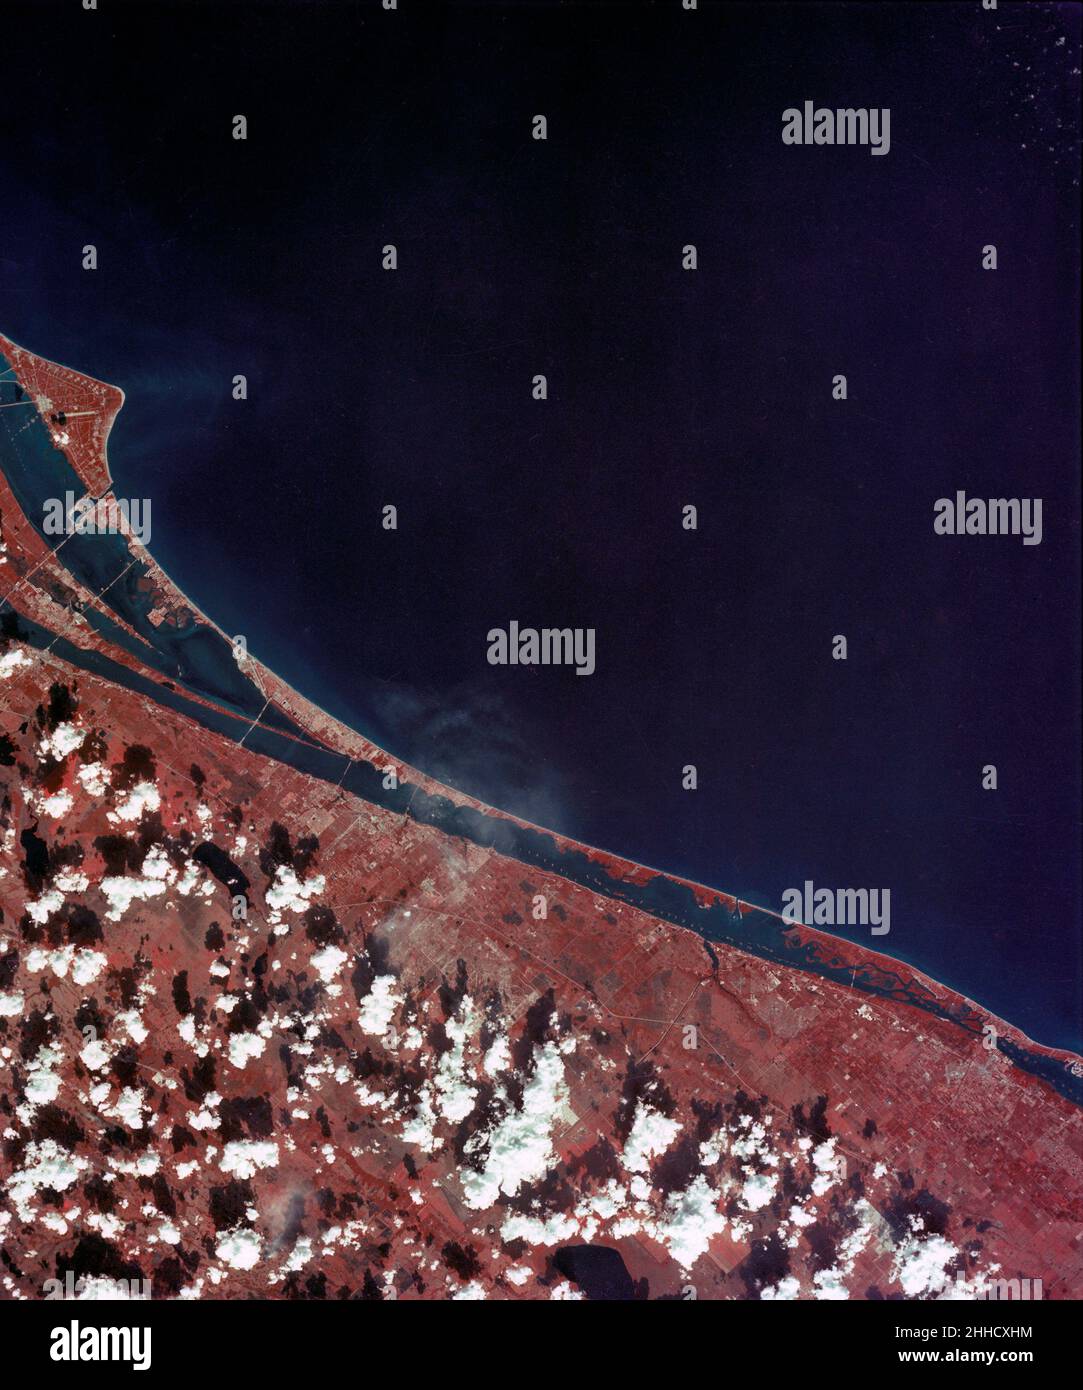 (February 1974) --- A vertical view of the Kennedy Space Center and the Florida Atlantic coast area is seen in this Skylab 4 Earth Resources Experiments Package S190-B (five-inch earth terrain camera) infrared photography taken from the Skylab space station in Earth orbit. This photograph shows the major land-ocean features of the Florida coast near Vero Beach northward to Cape Canaveral and the KSC complex. The launch pads for the Skylab missions are clearly visible. Identification of living vegetation is possible through the use of the color infrared film. Various shades of red portray diffe Stock Photo